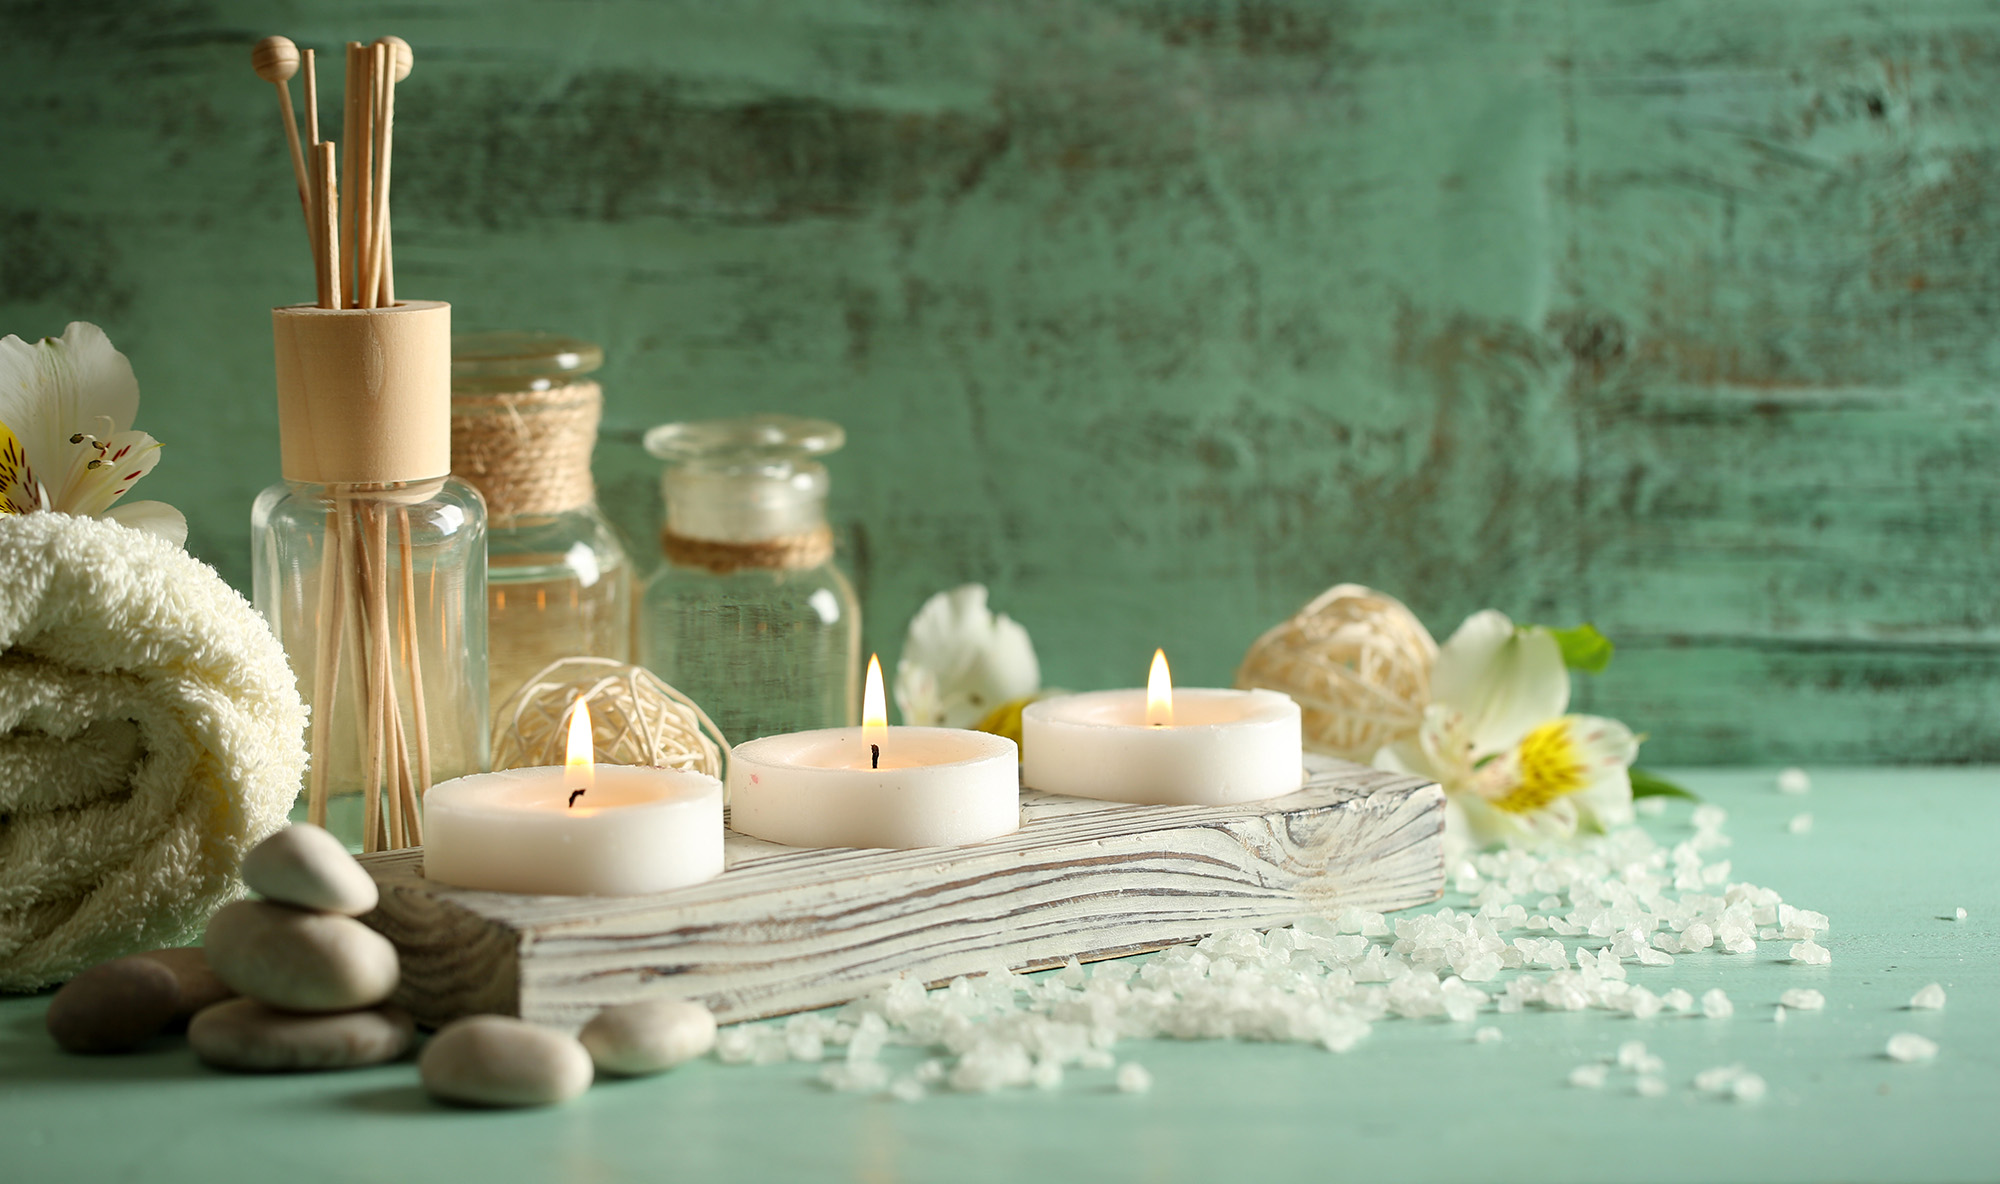 Spa composition with candles, stones, bottles and a towel